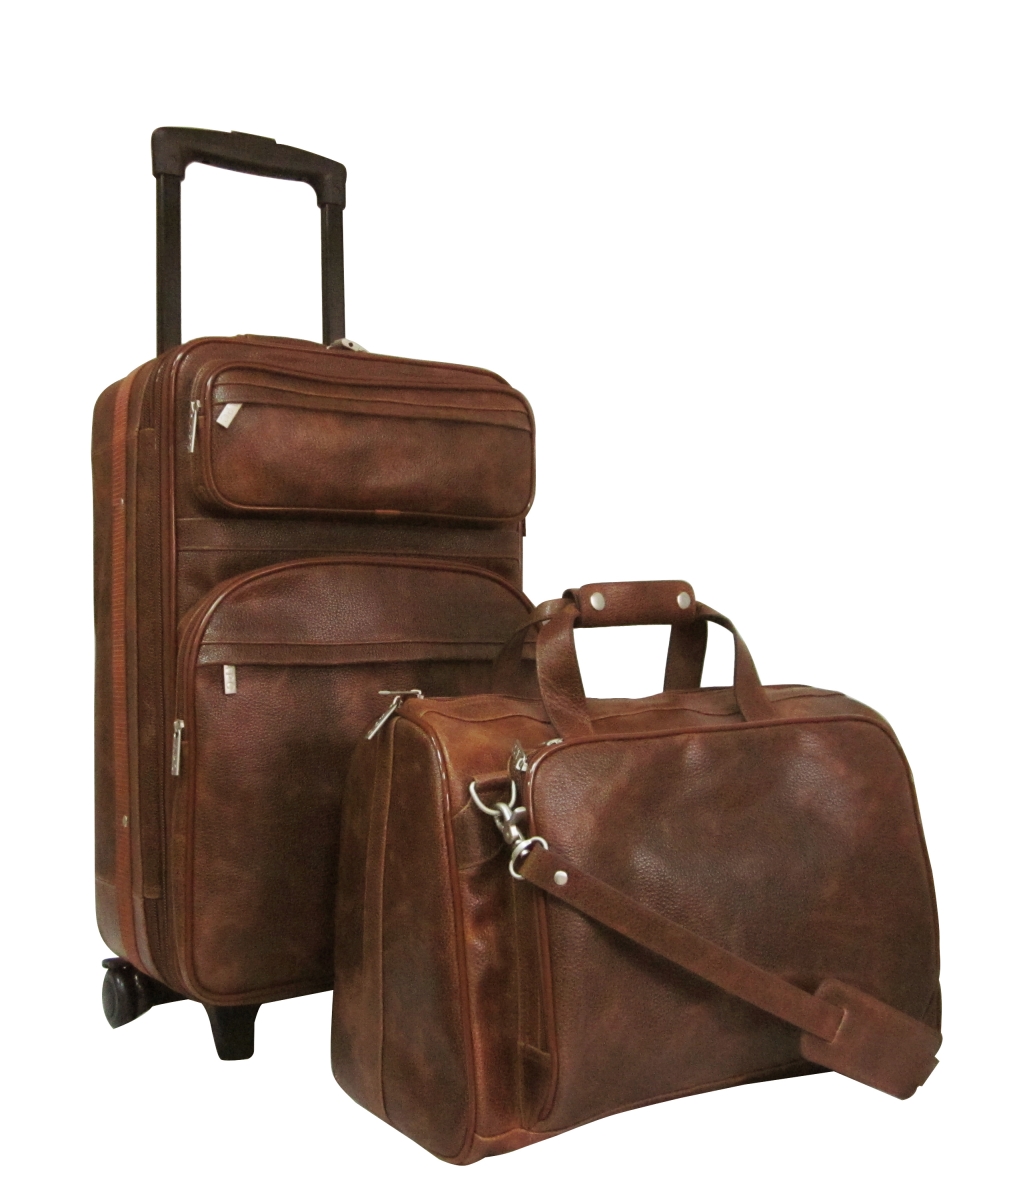 Picture of AmeriLeather 8002-4 Leather Traveler Set, Waxy Brown - 2 Piece